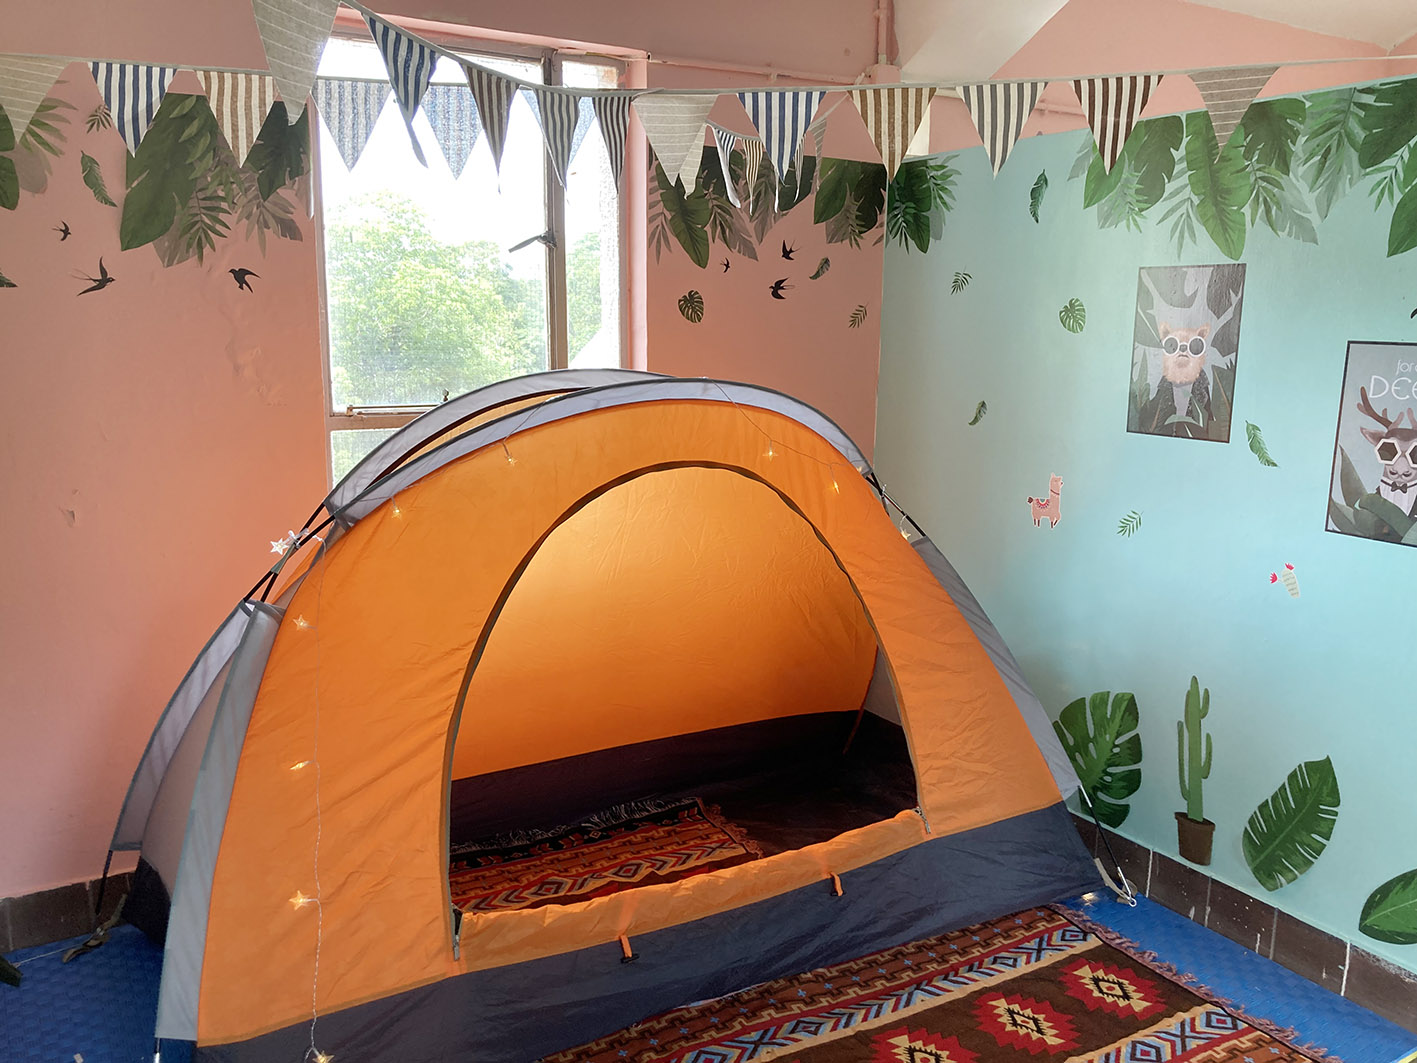 Different themed rooms can be chosen, there are Tent and Chill Themed Room for camping newbies!